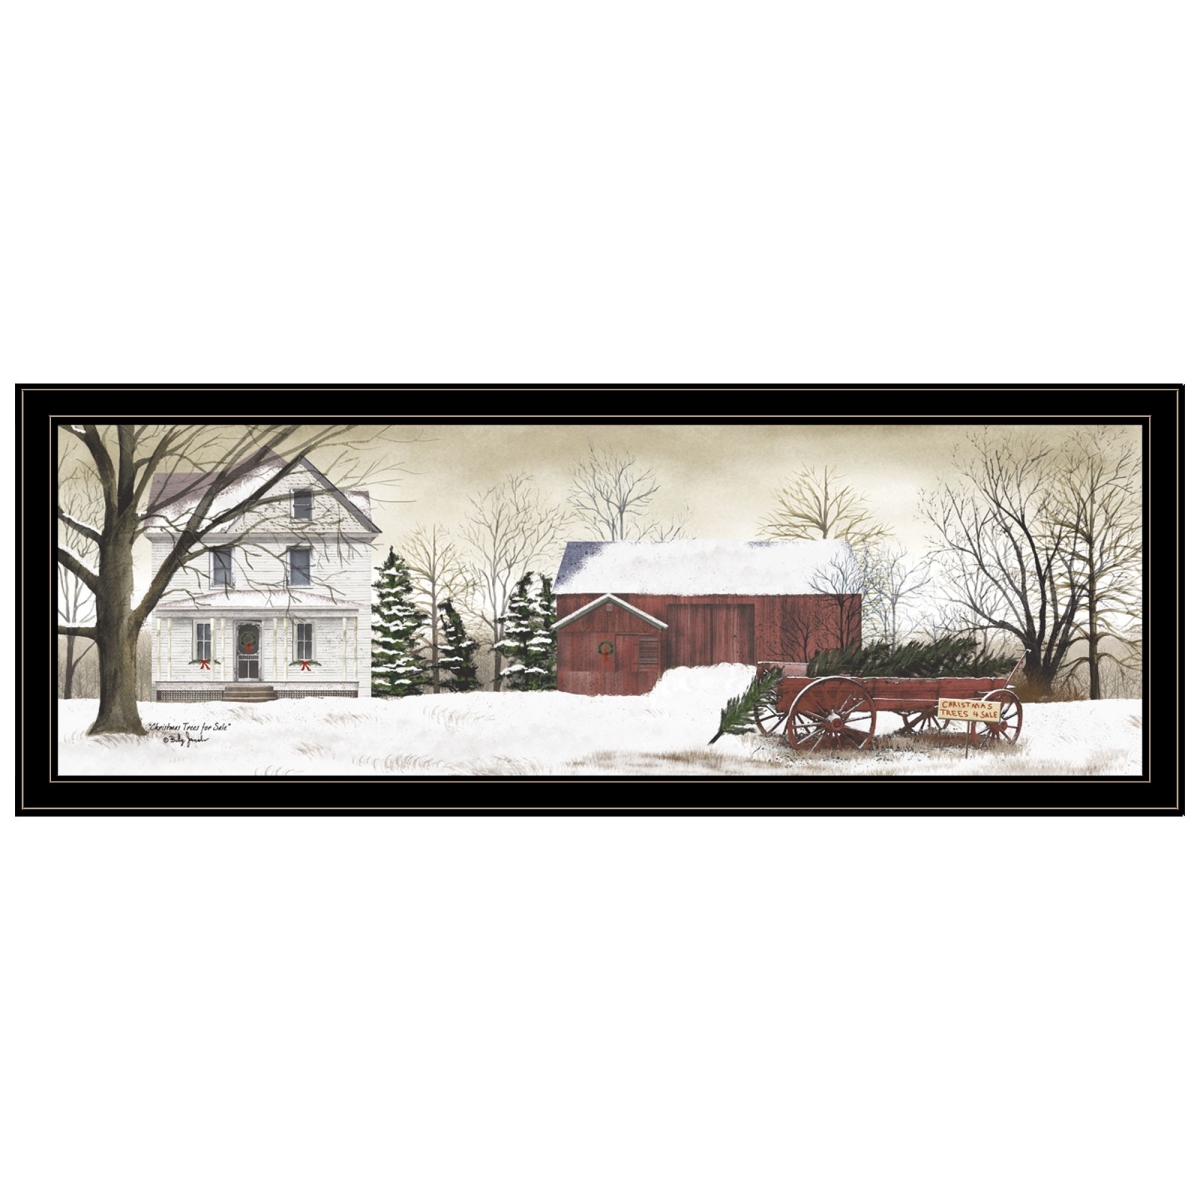 HomeRoots 406337 15 x 39 x 1 in. Christmas Trees for Sale 7 Black Framed Print Wall Art